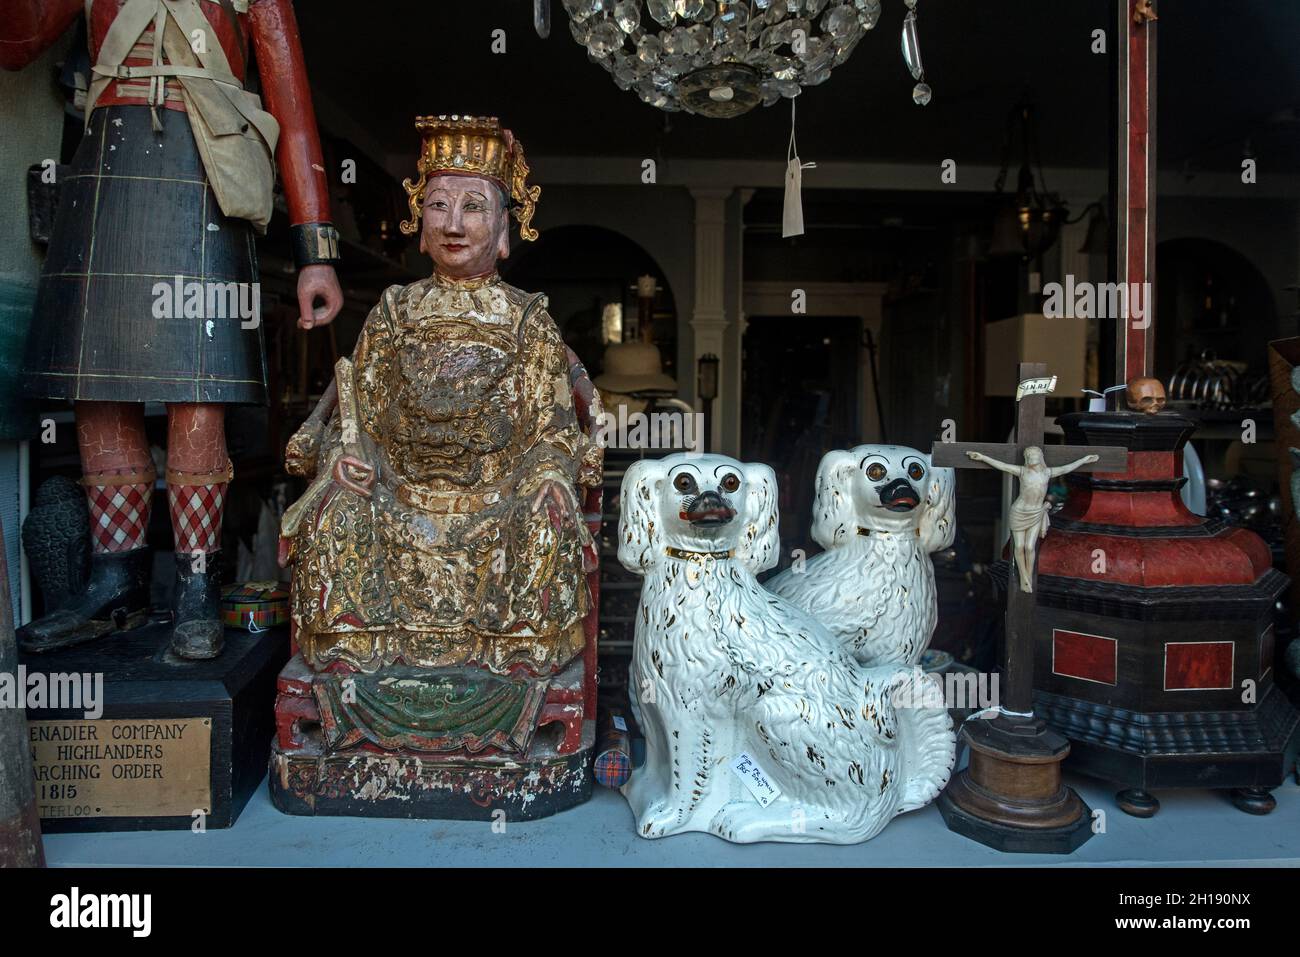 Antiques on display in the window of an antique shop in Dundas Street, New Town, Edinburgh, Scotland, UK. Stock Photo